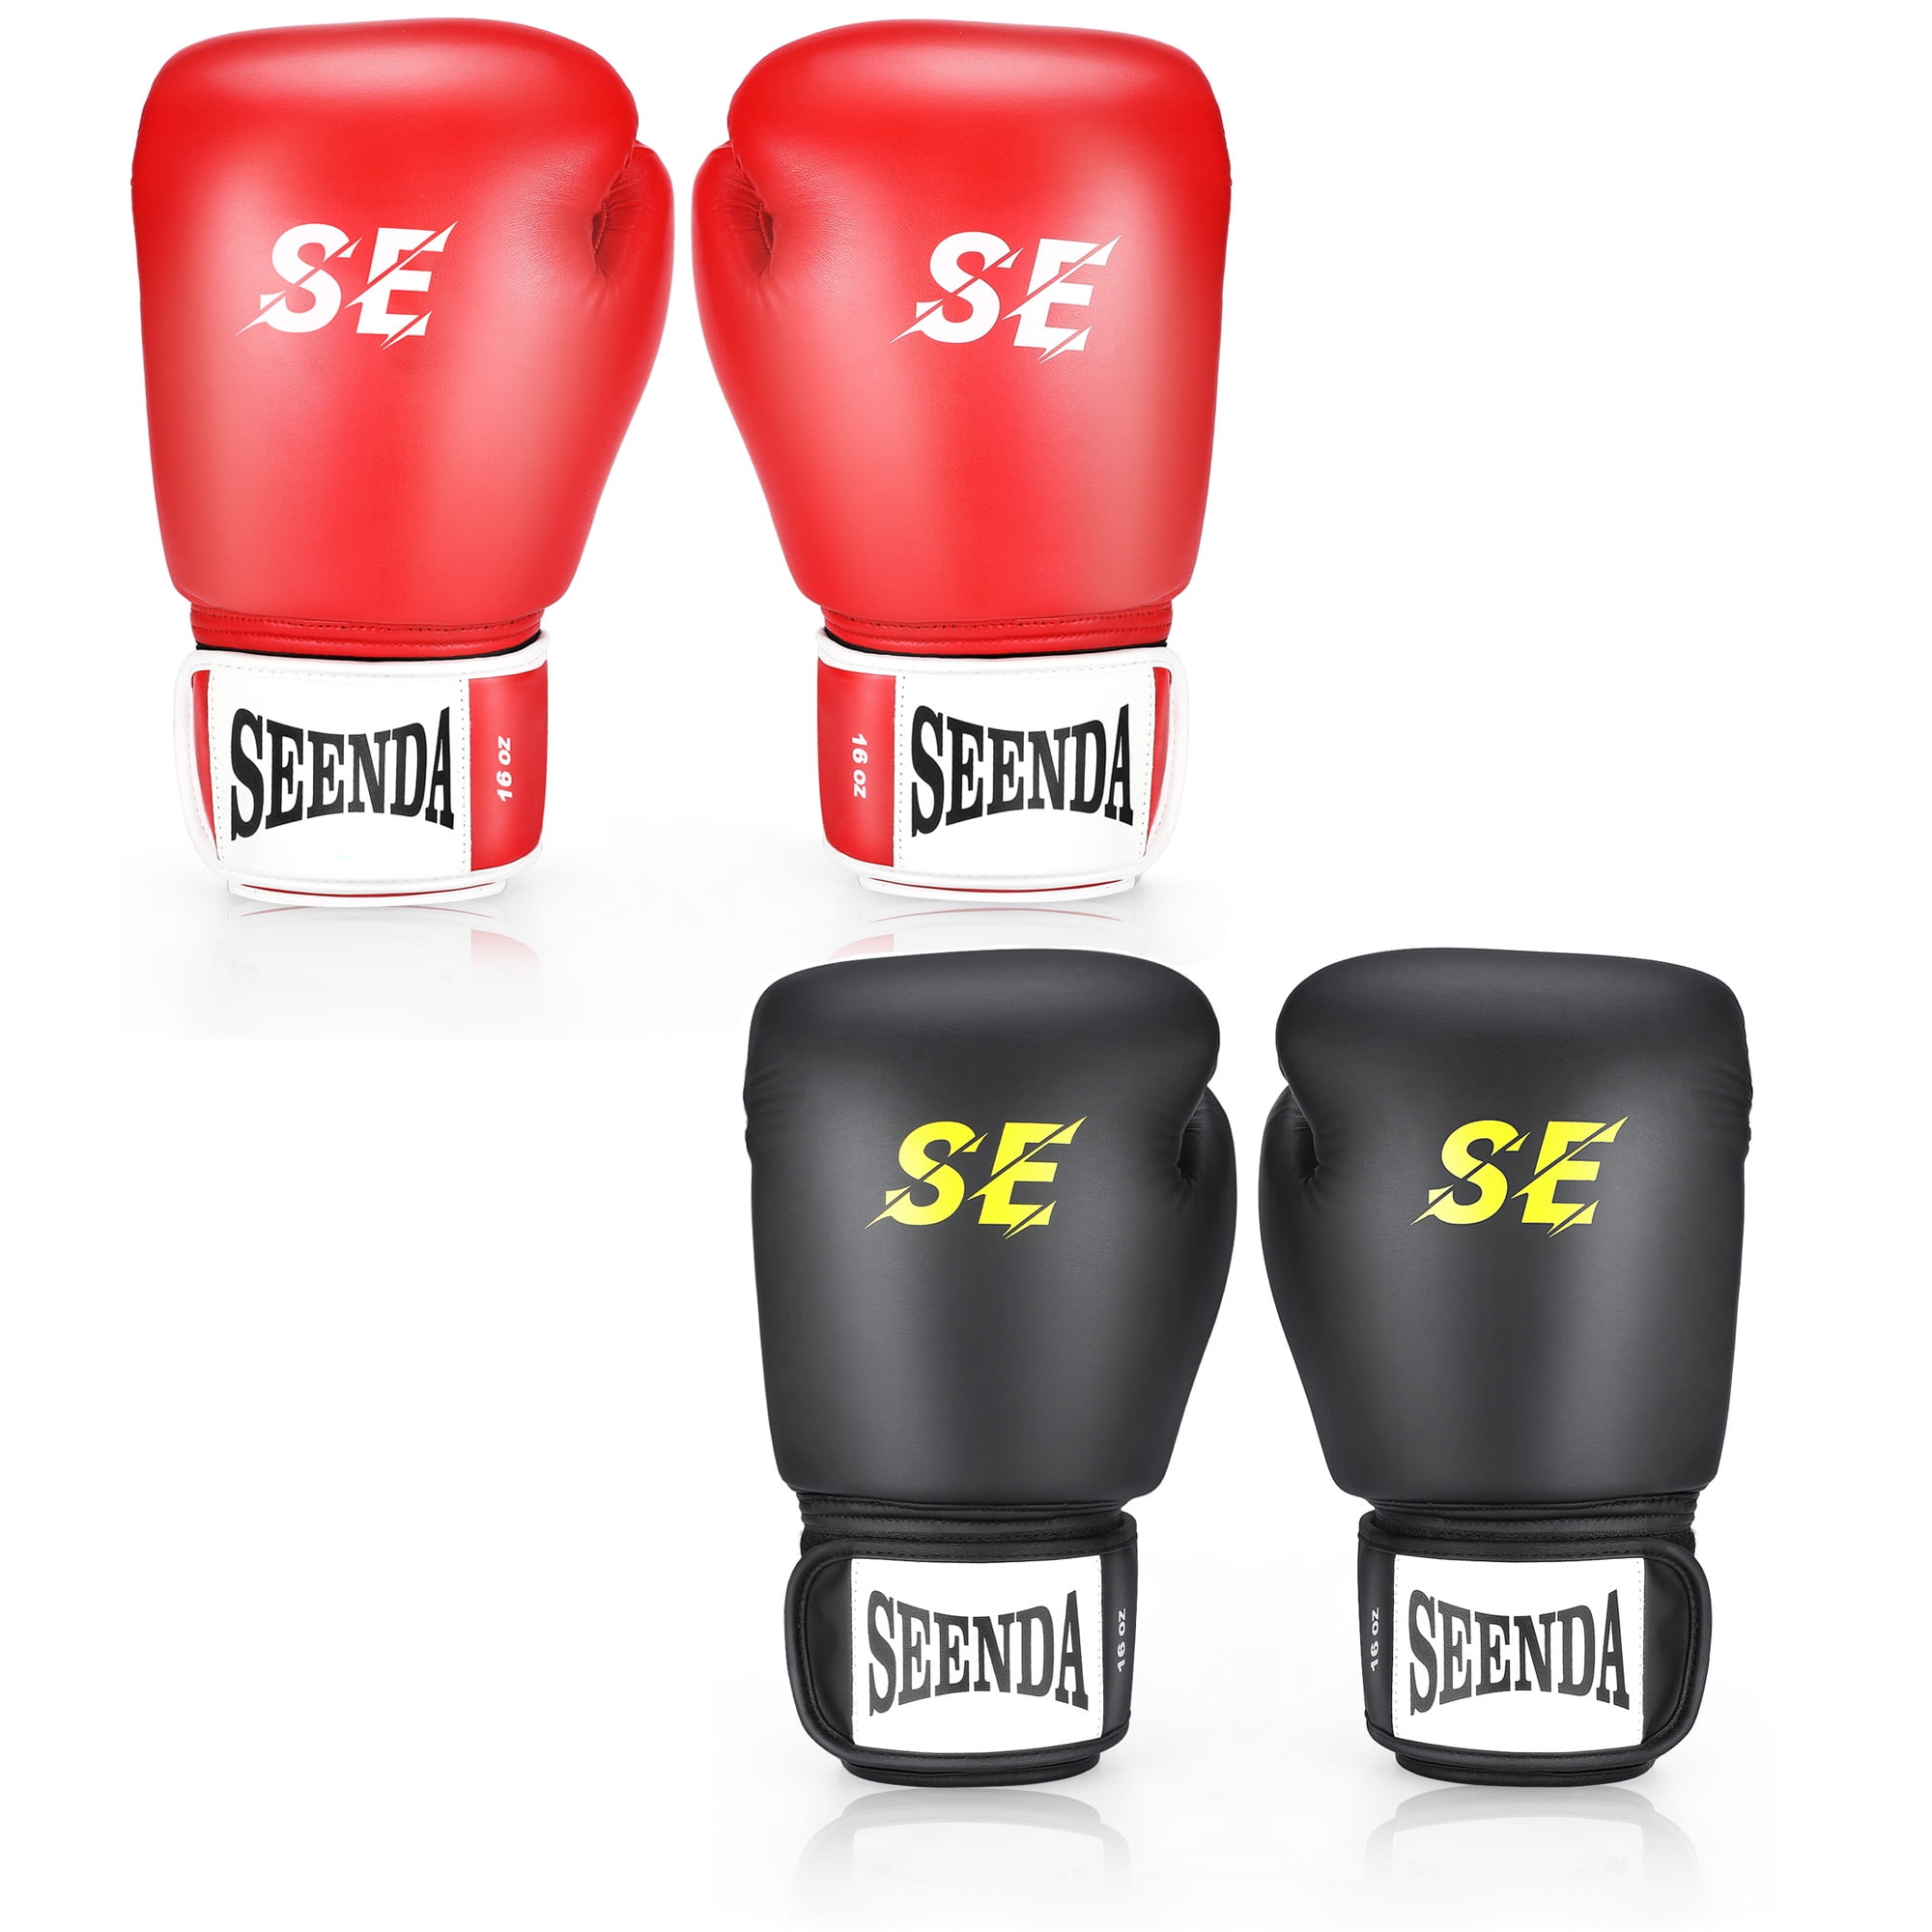 VELO Leather Gel Boxing Gloves Punch Bag Fight gym MMA Muay Thai Sparring Pads 